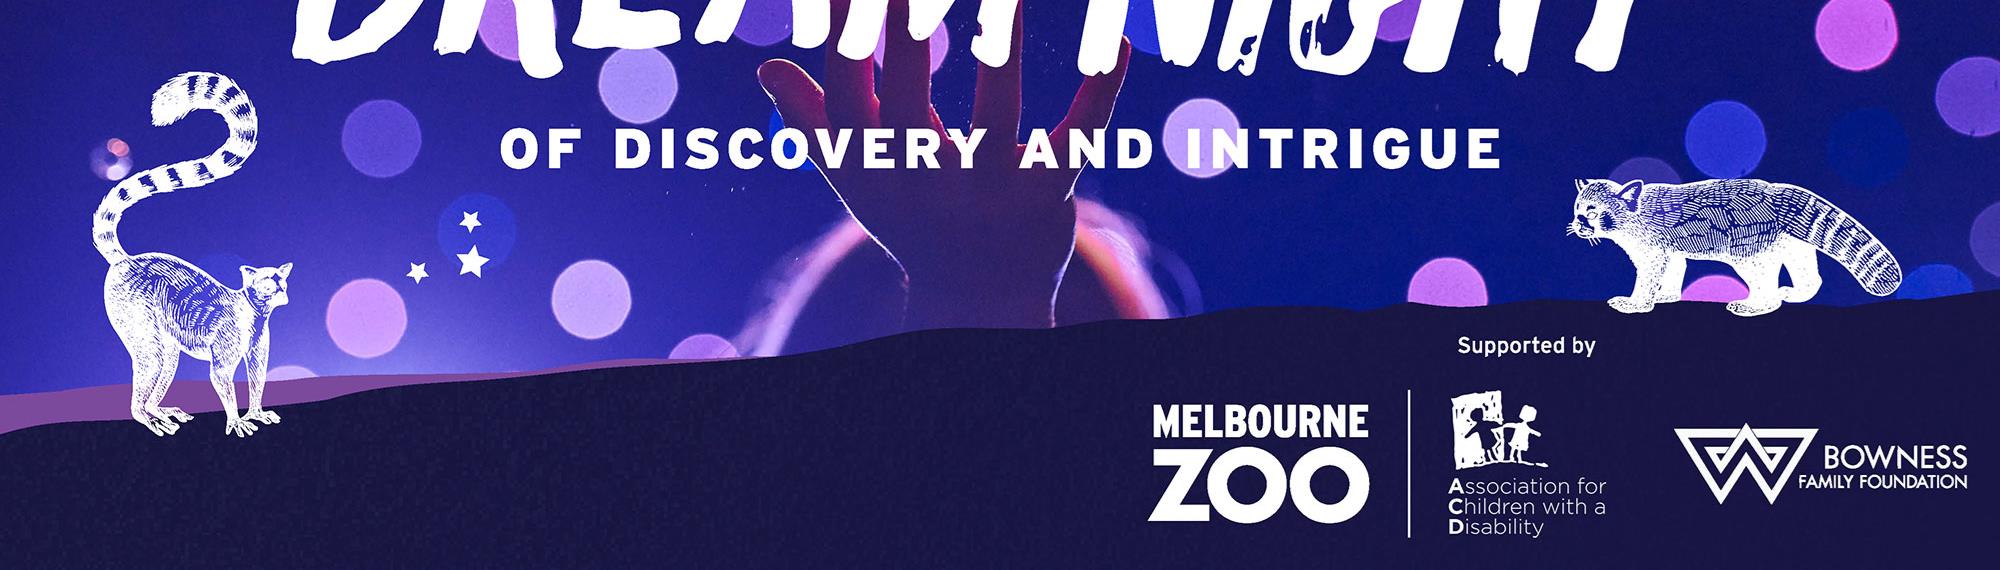 Dream Night campaign banner. A magical night of discovery and intrigue on 12th October at Melbourne Zoo.